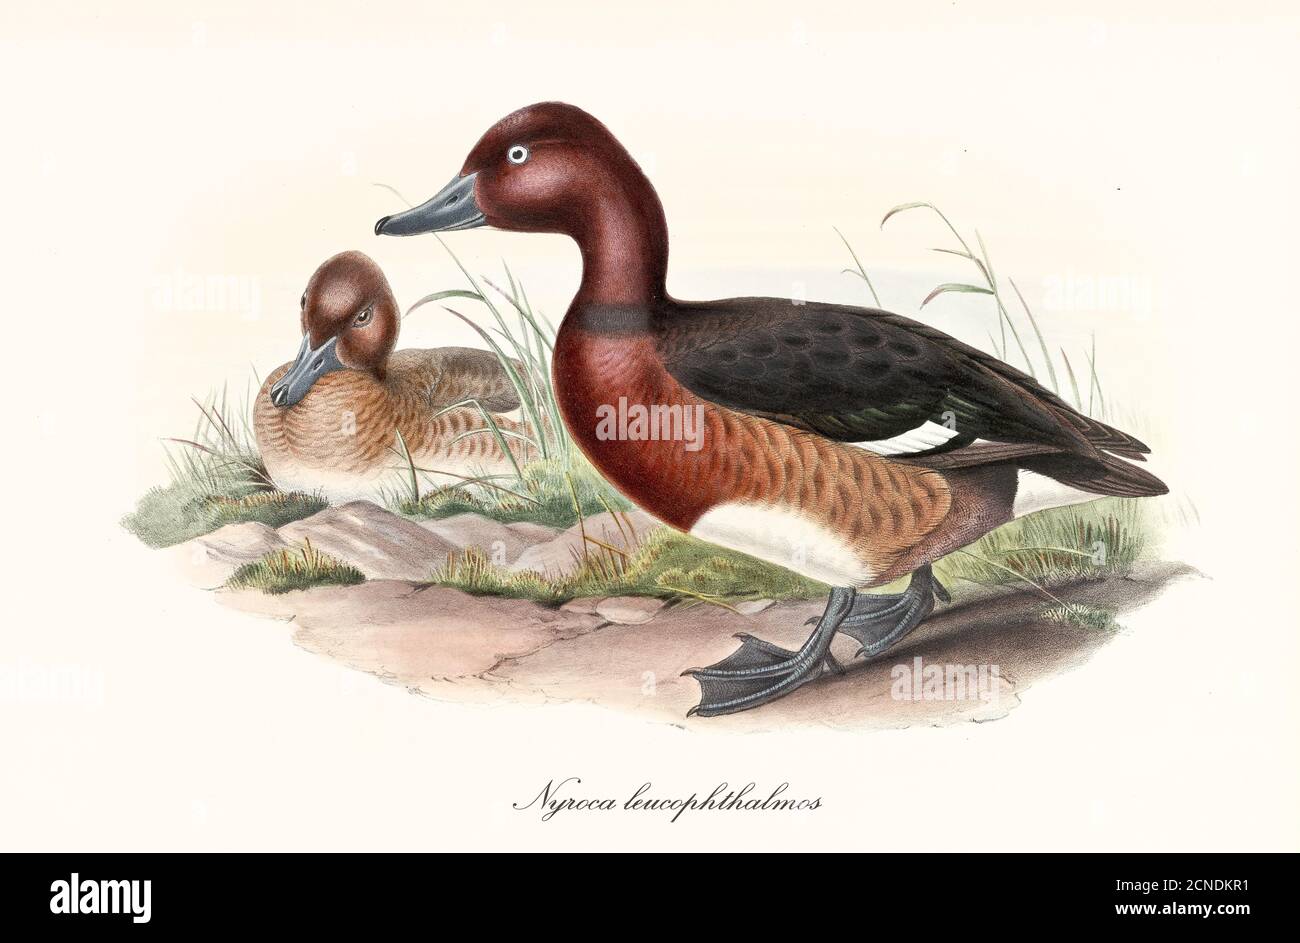 Webbed pawed bird Ferruginous Duck (Aythya ferina) walking to left while another esemplar is crouched. Vintage art by John Gould London 1862-1873 Stock Photo